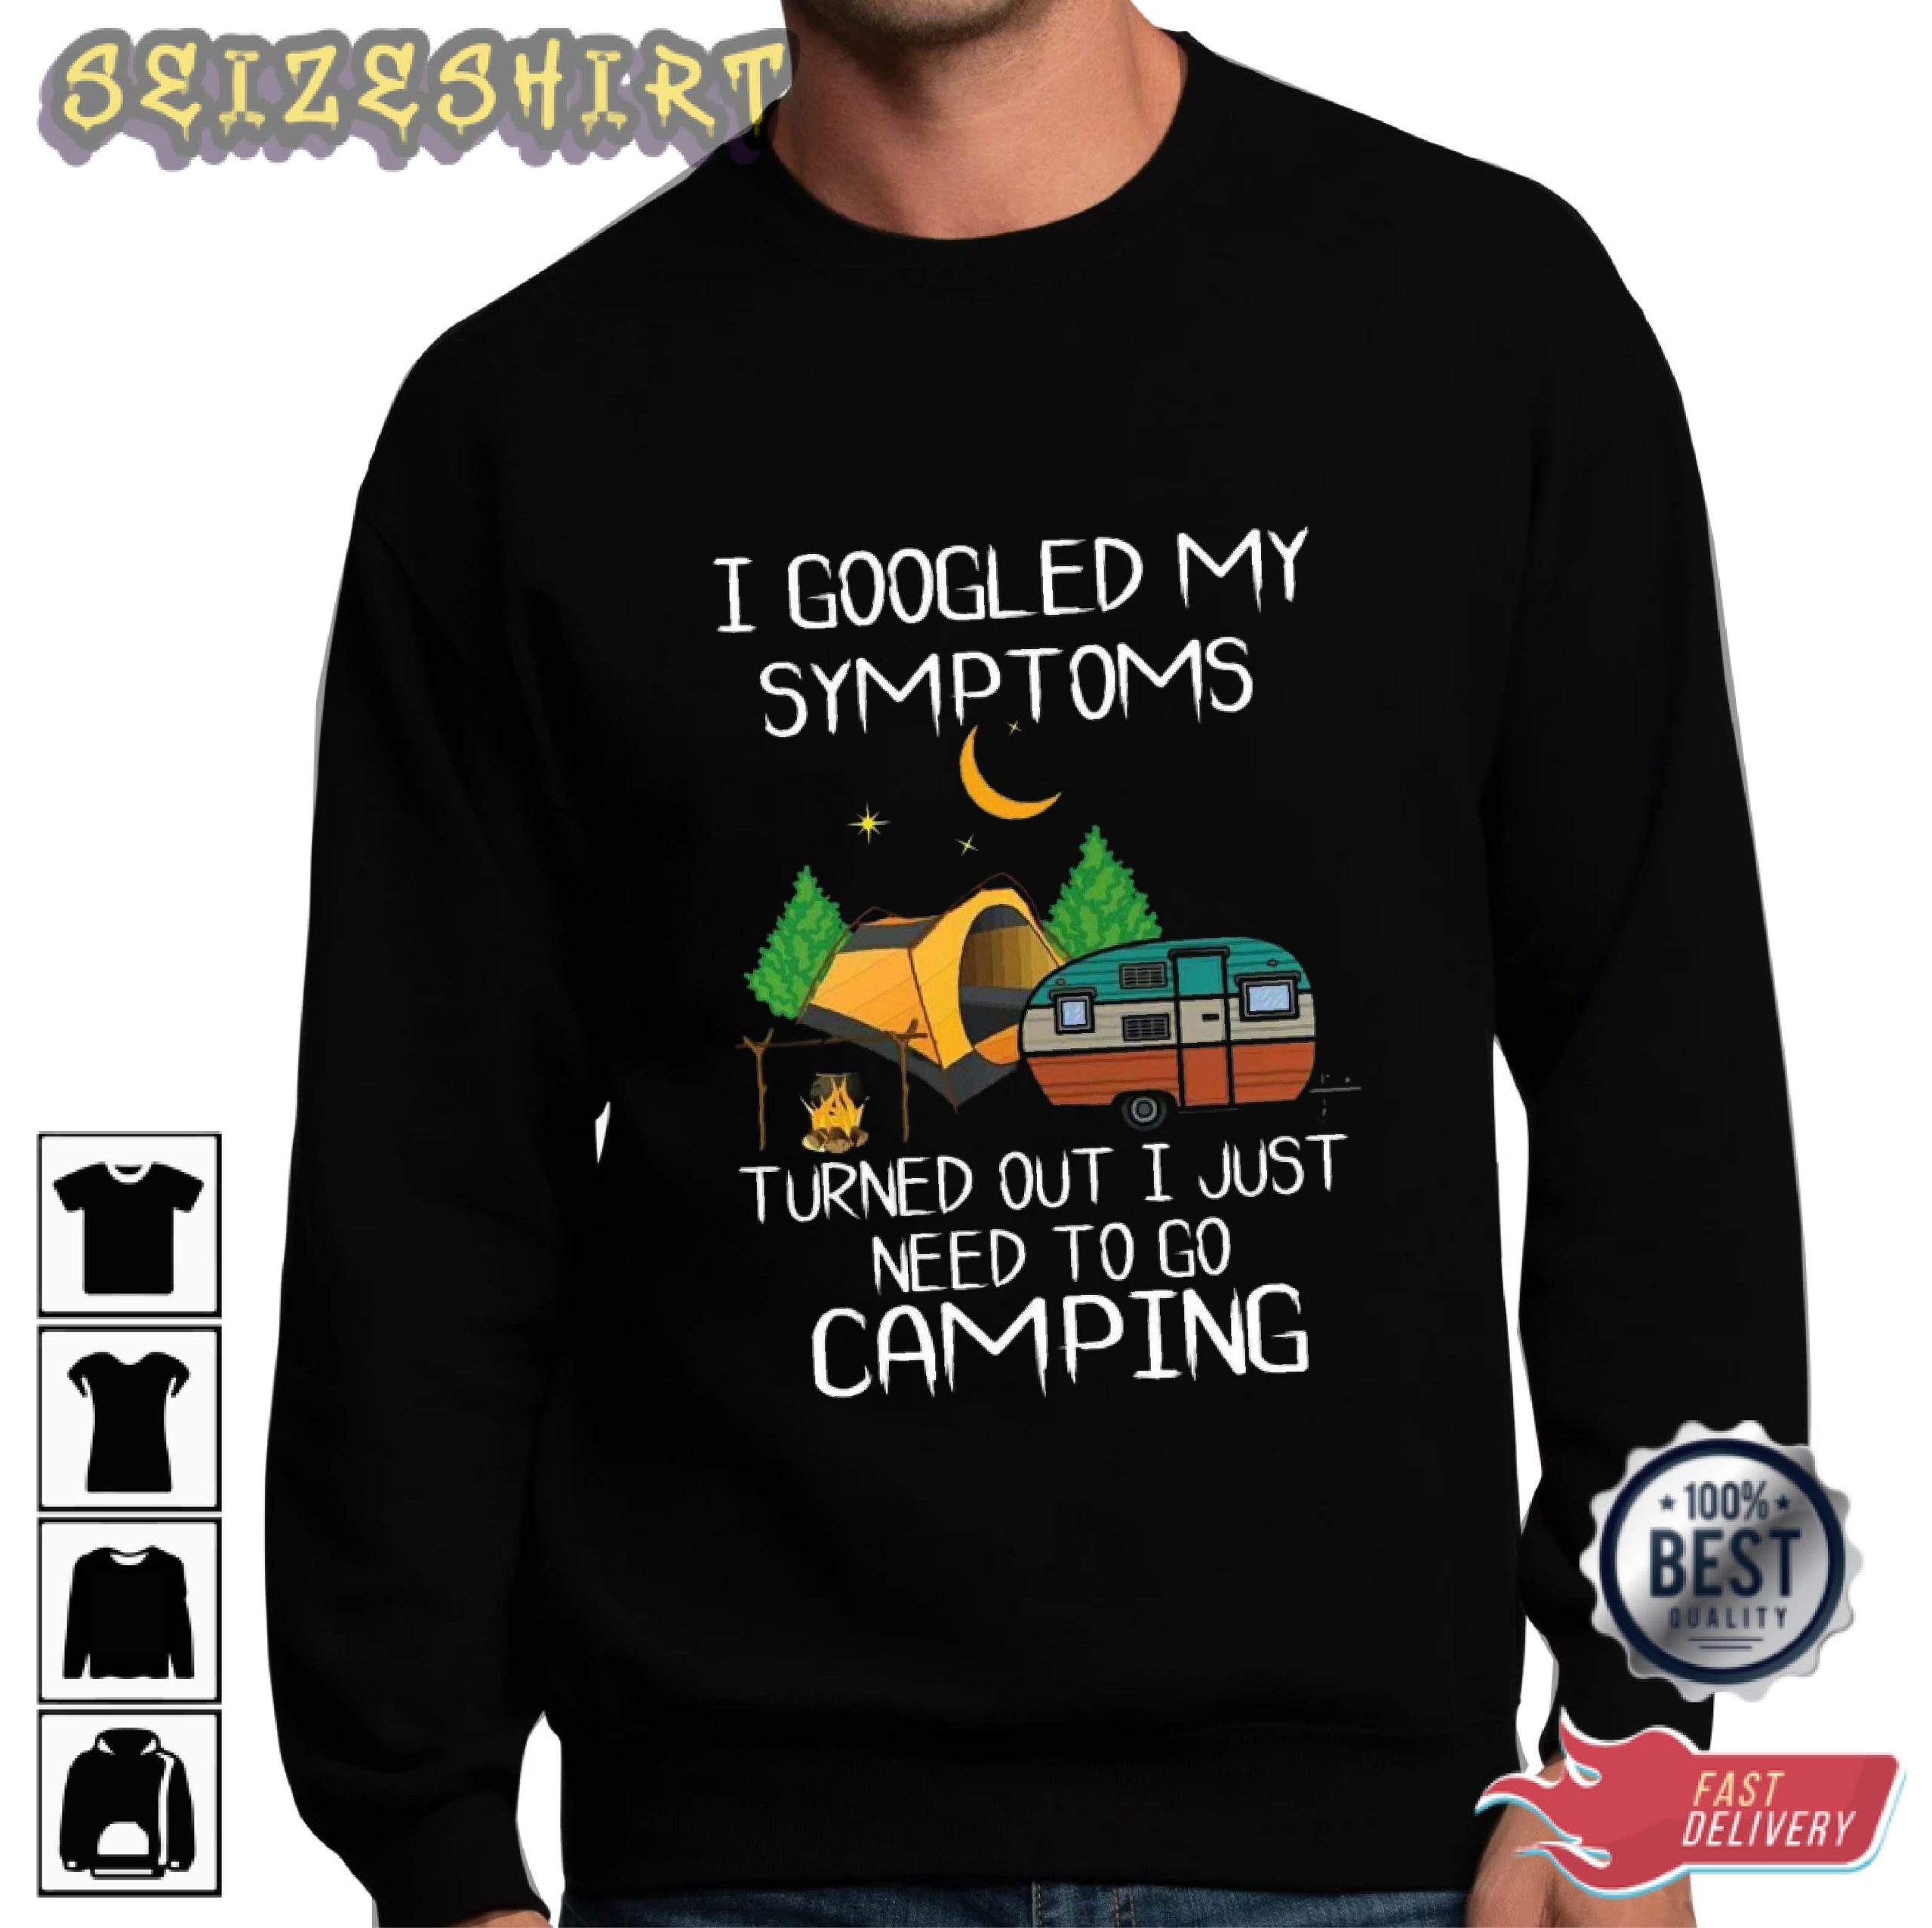 I Googled My Symtoms Camping Graphic Tee